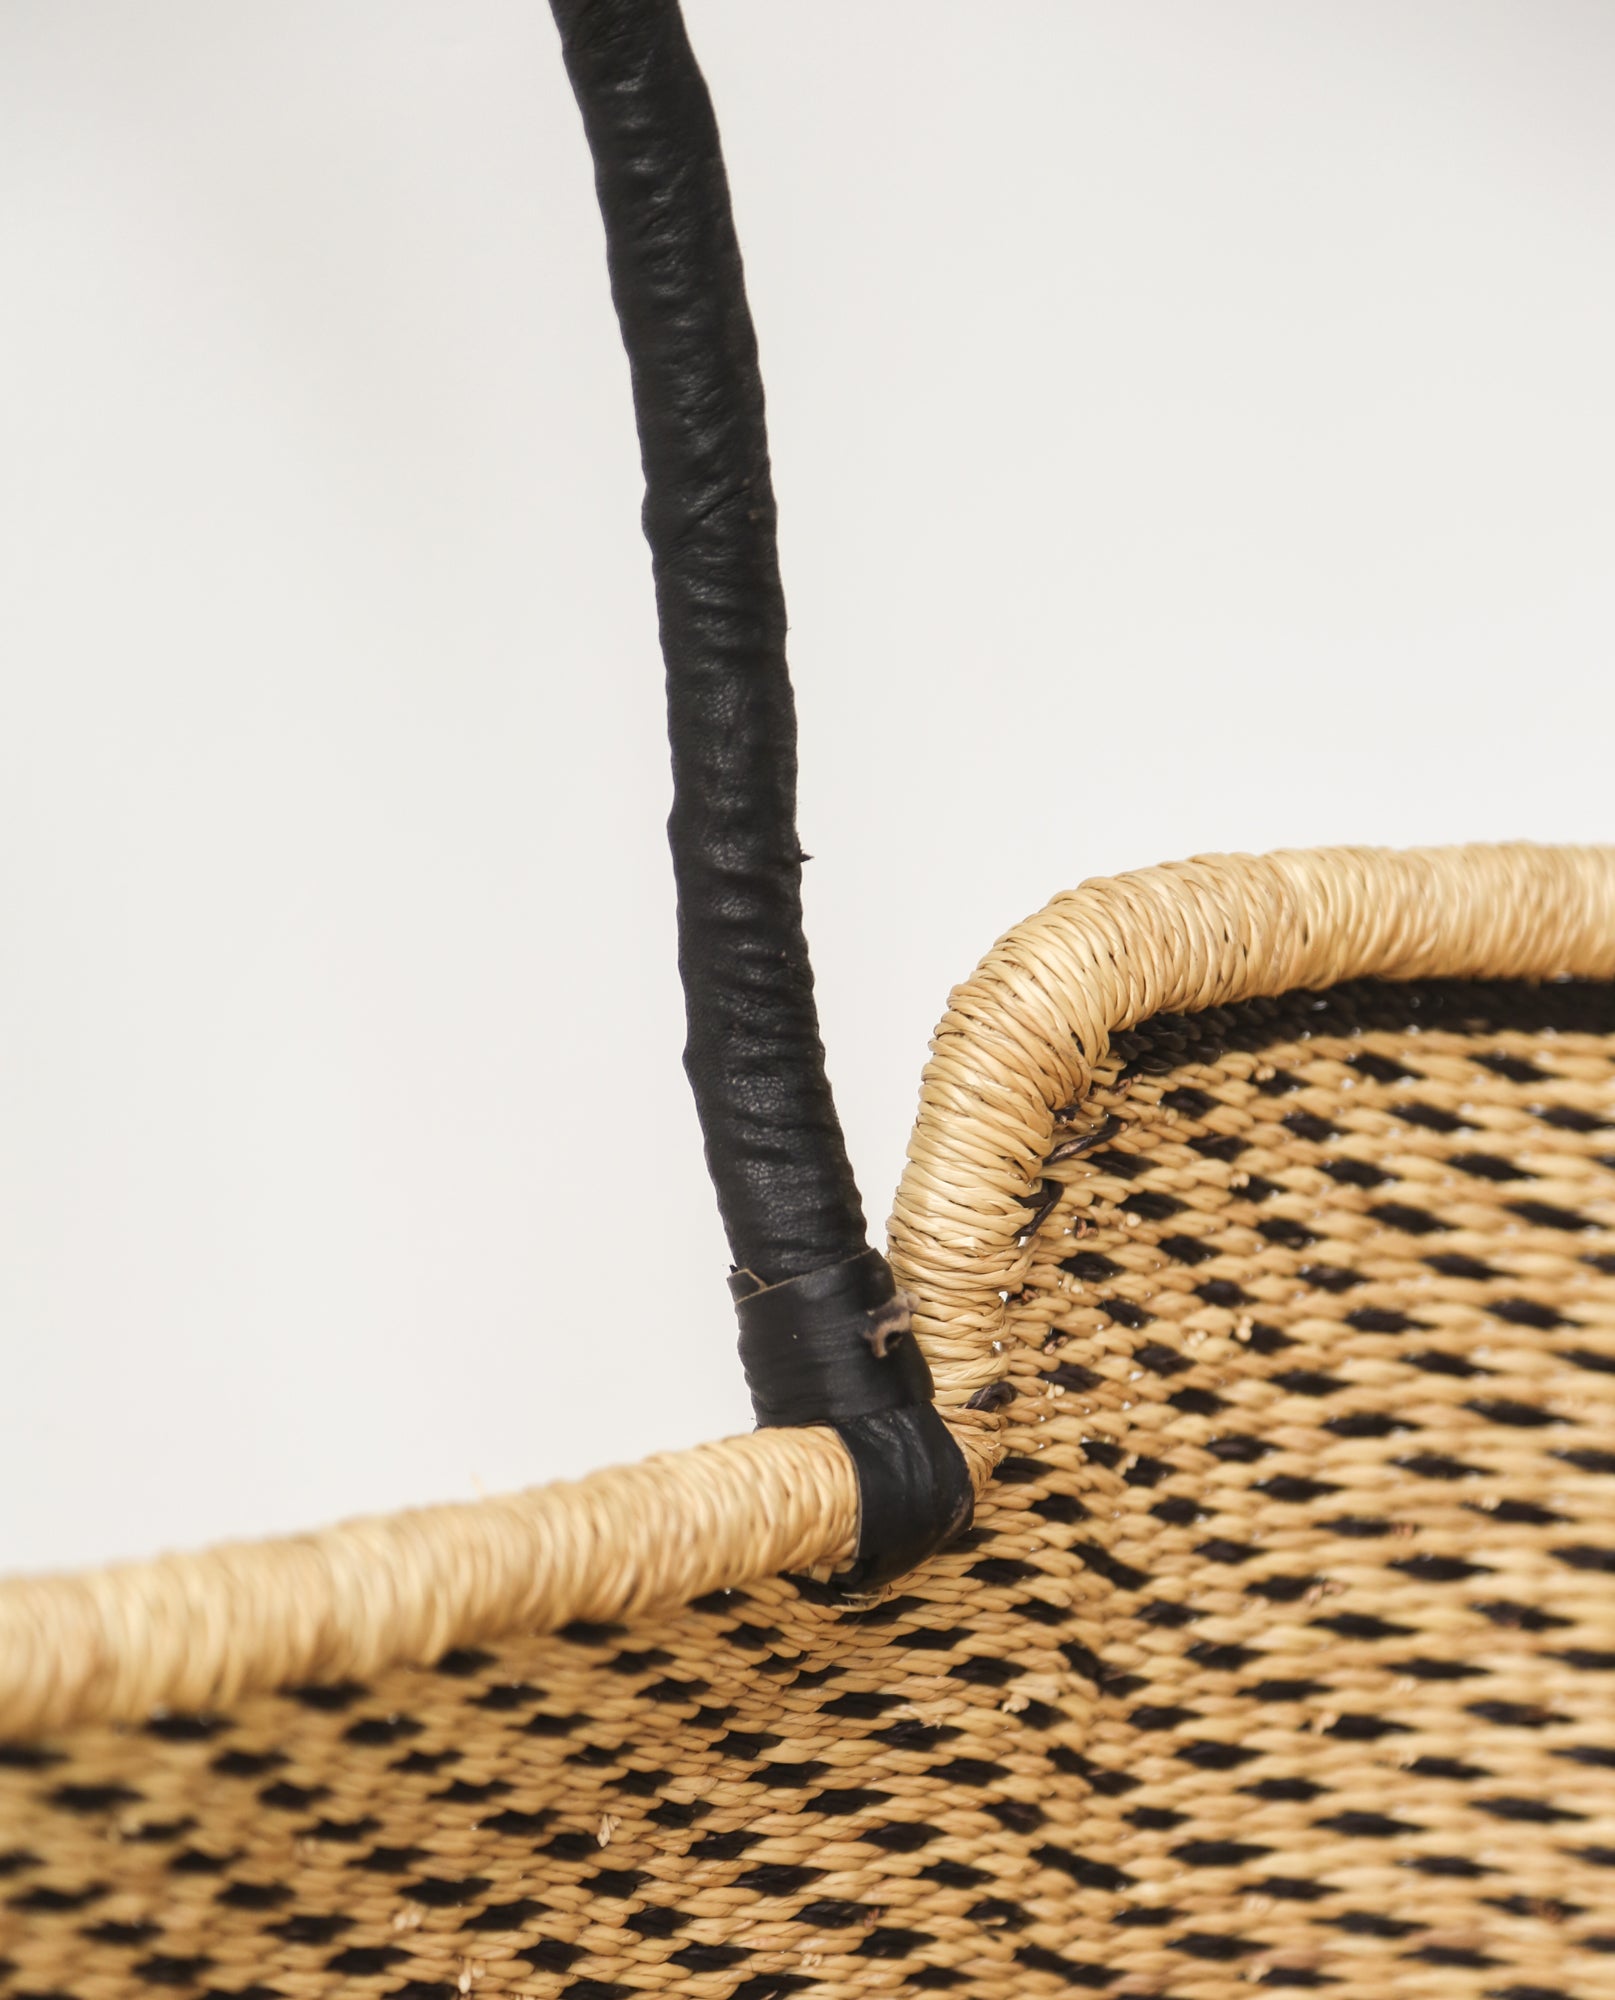 SISI Handwoven Moses Basket With Leather Handles